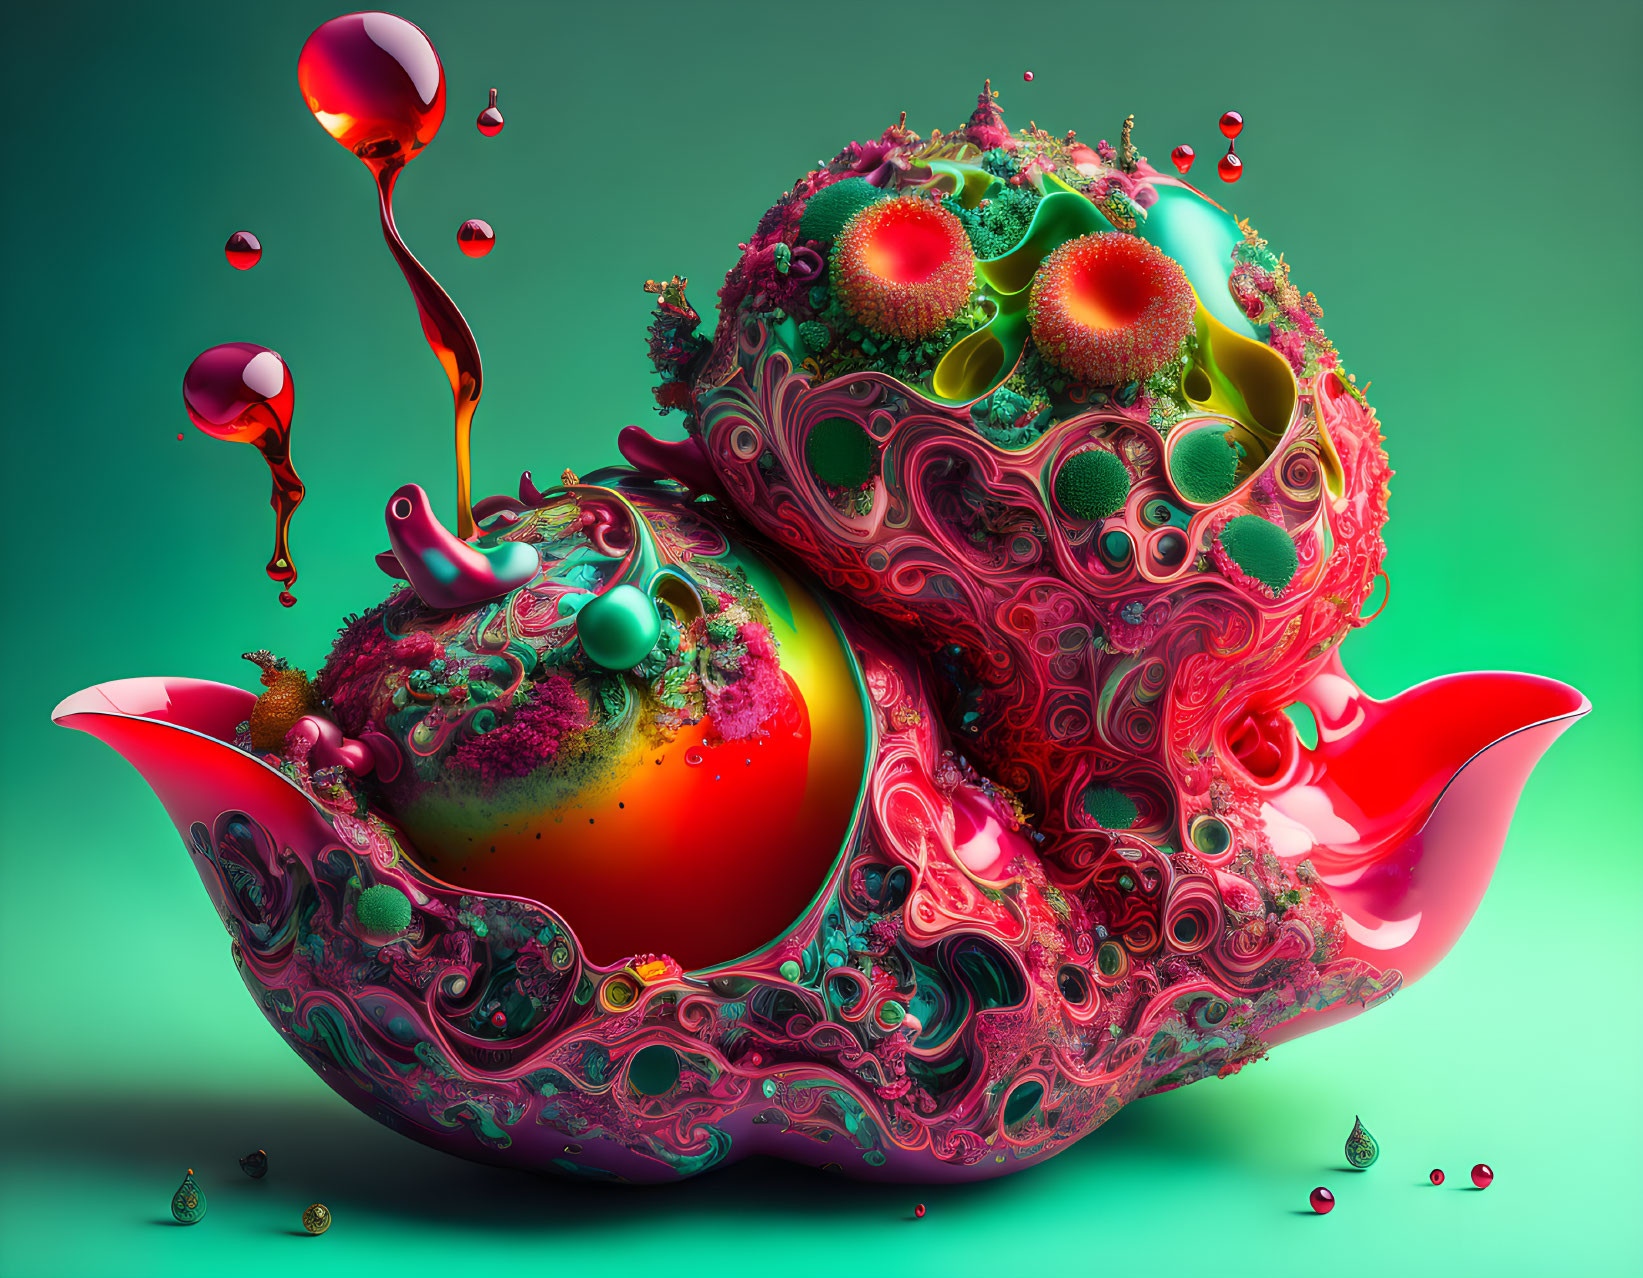 Abstract 3D art: Vibrant pink and green shapes with suspended liquid droplets